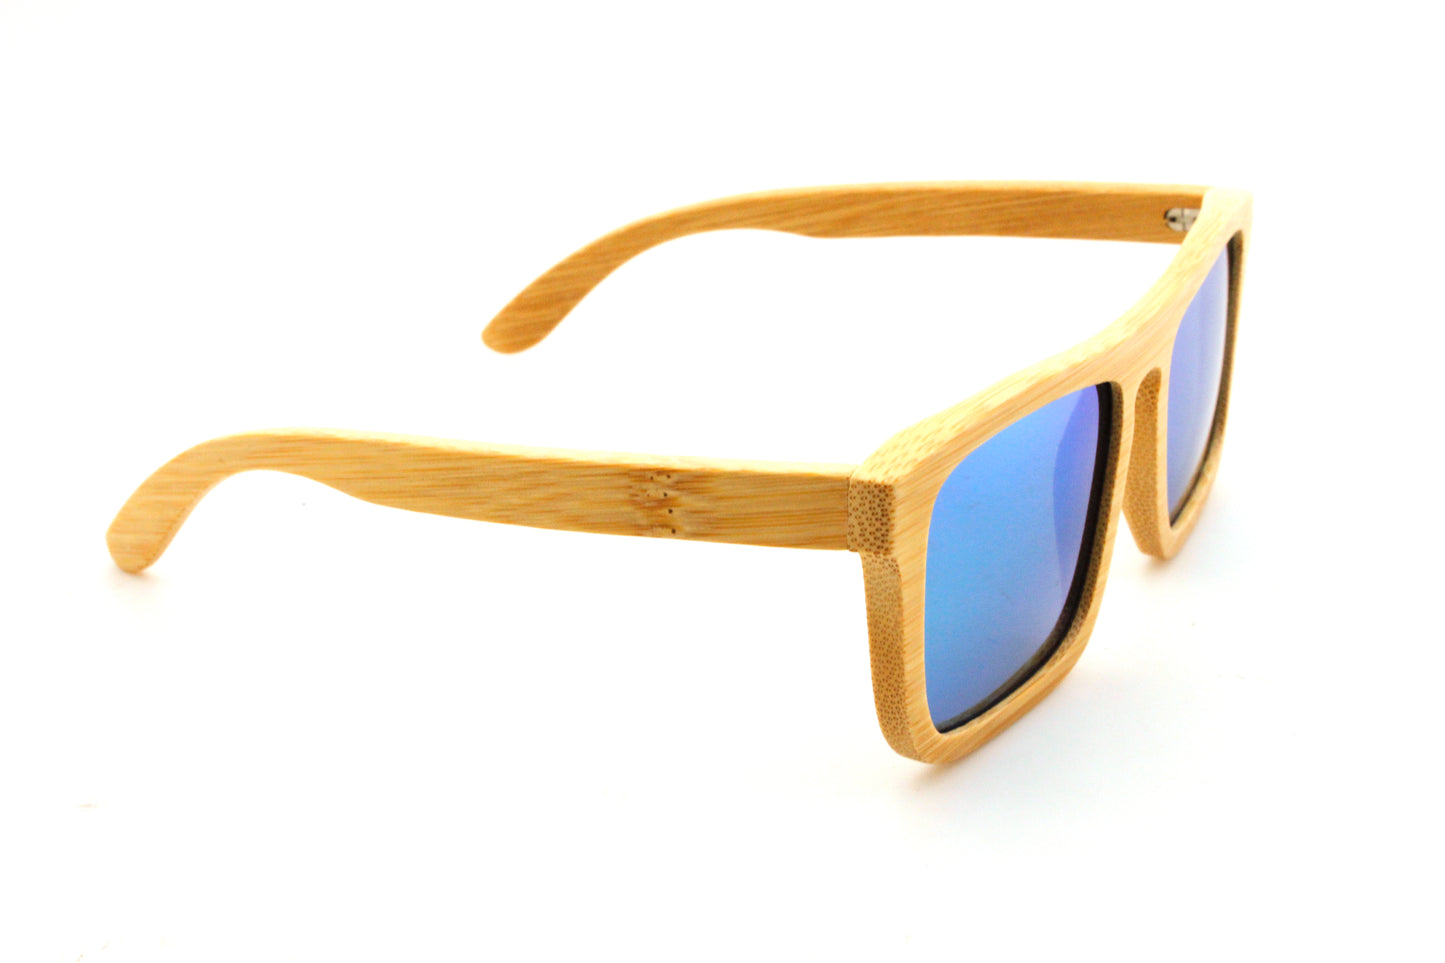 Teixereta bamboo wood sunglasses view from the right